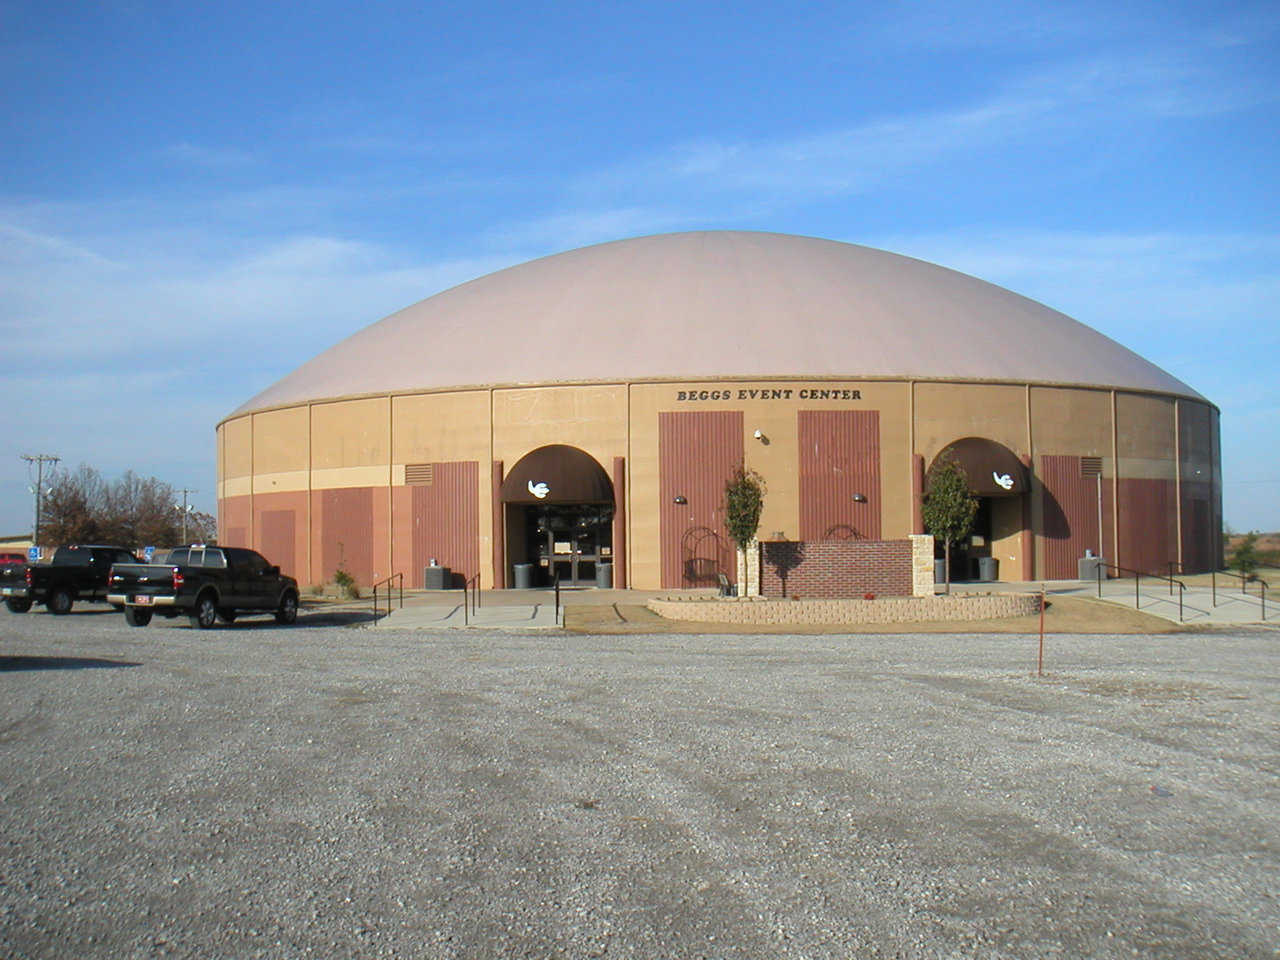 Beggs, OK Event Center — Beggs built two Monolithic Domes: A 160’ diameter gymnasium/event center built on a 24’ Orion wall; a 112’ diameter dome on a 12’ Orion wall that provides nine additional classrooms, offices and a student commons area.